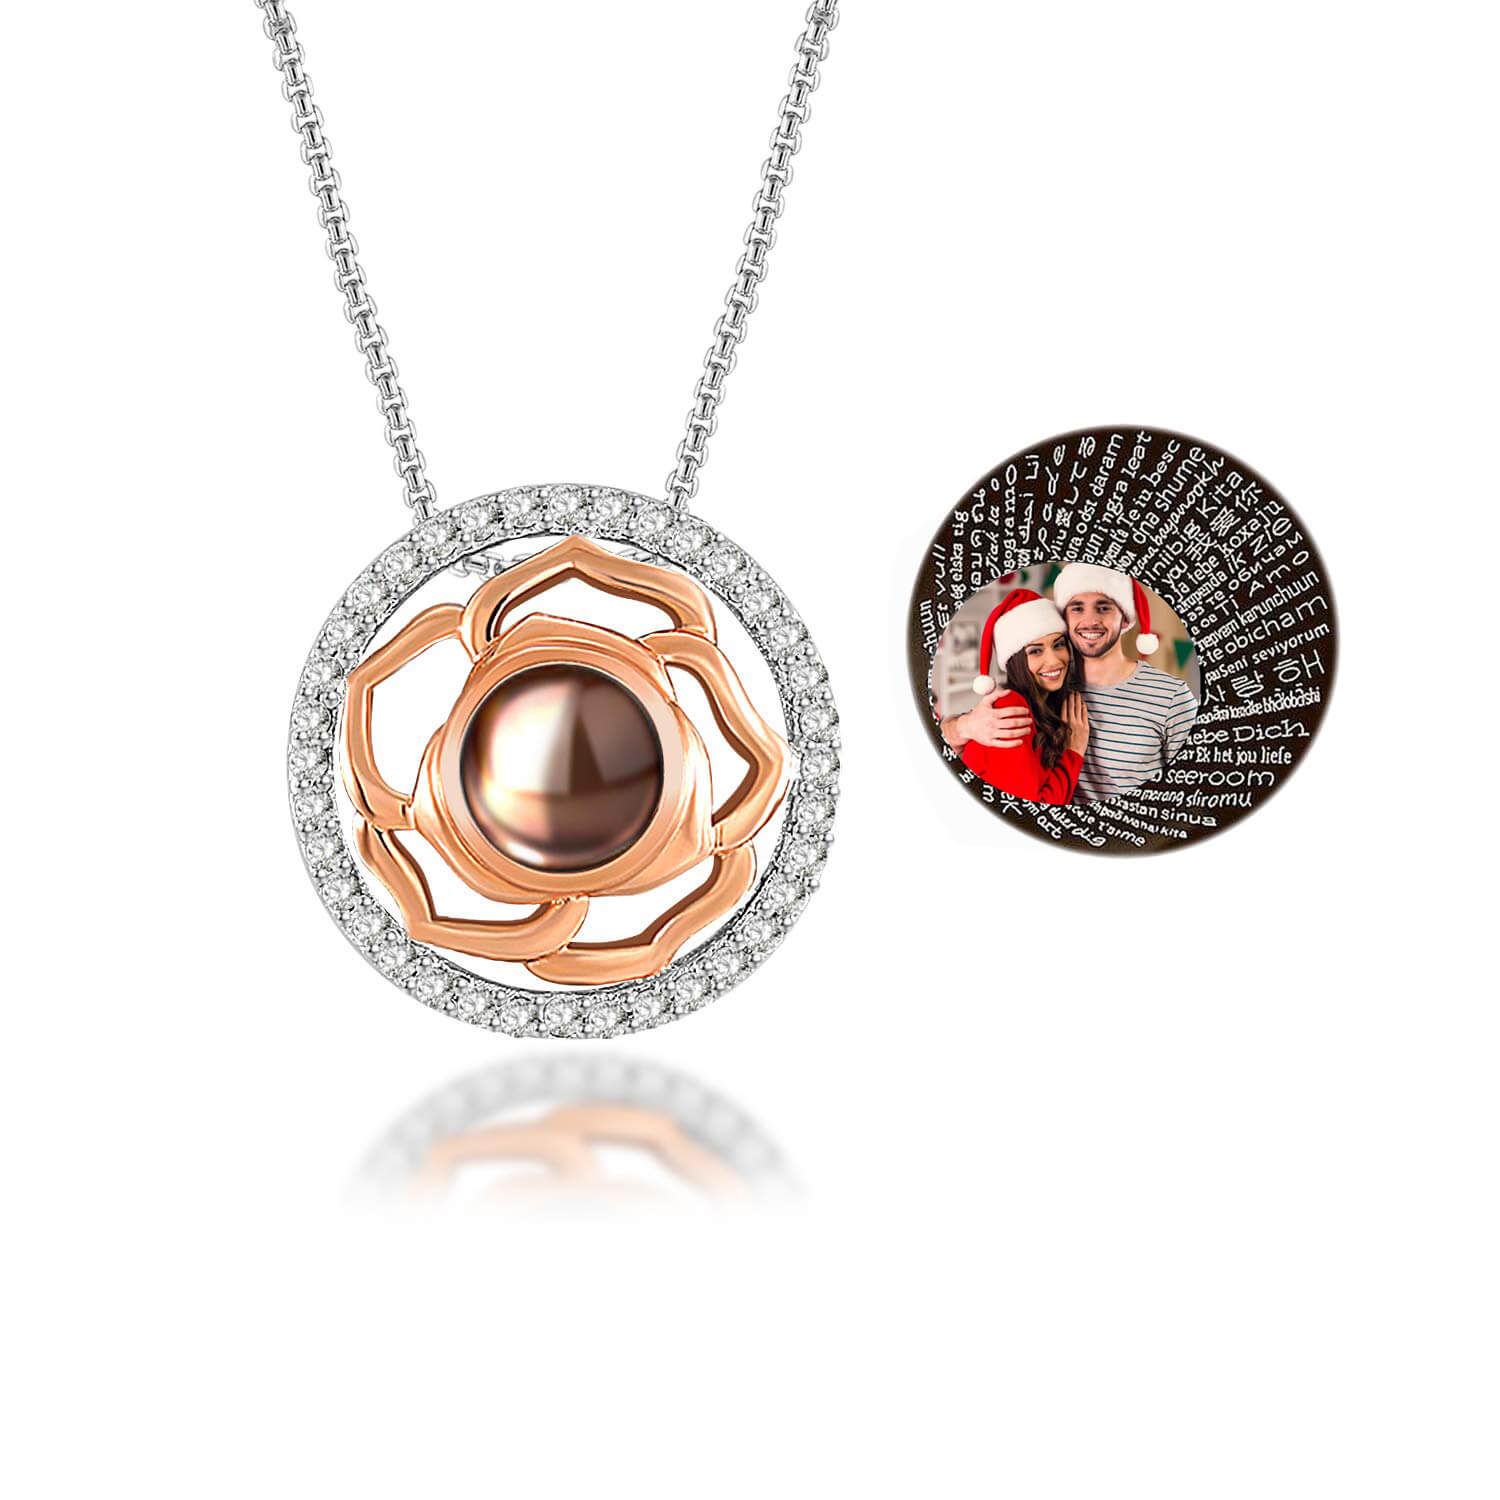 Two Tone Rose Flower Pendant Color Photo And 100 Languages "I Love You" Projection Personalized Custom Photo Necklace-silviax